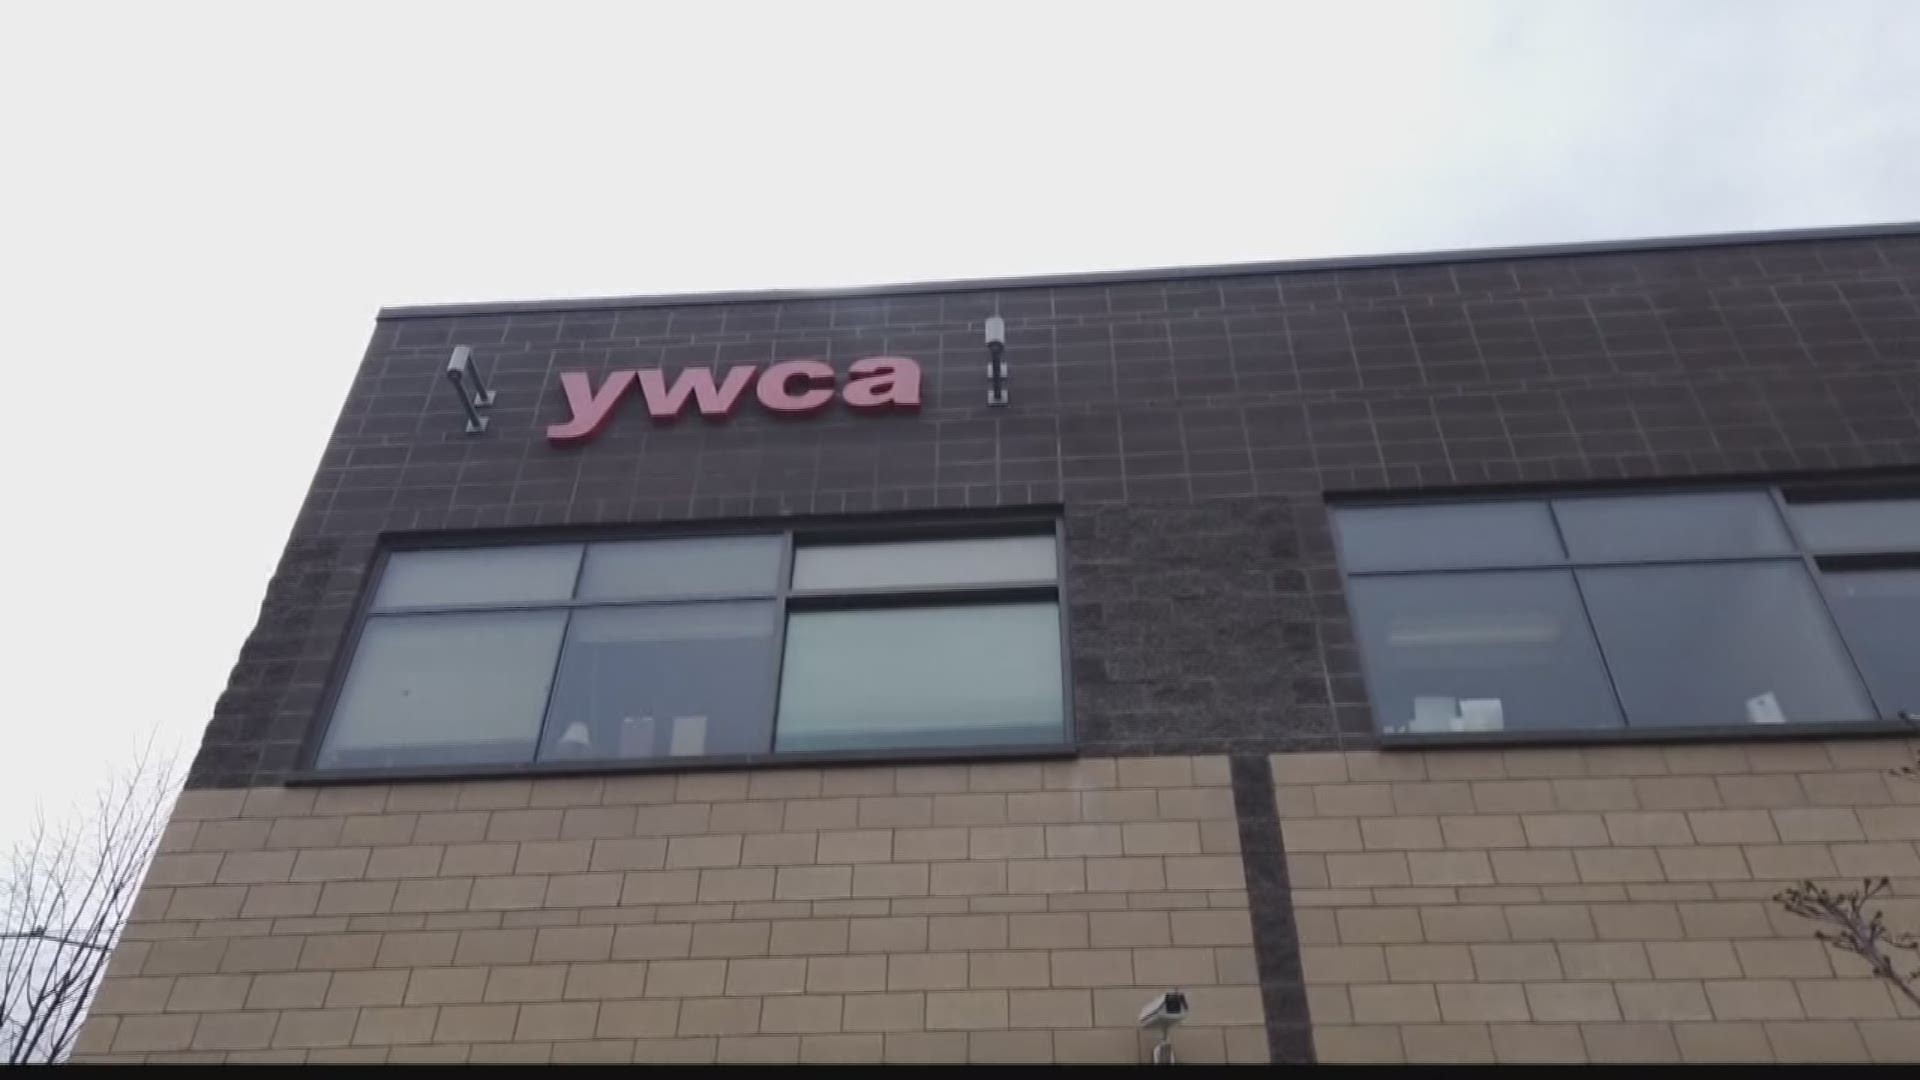 The YWCA can retain over 80 employees with critical funds from PPP loans.